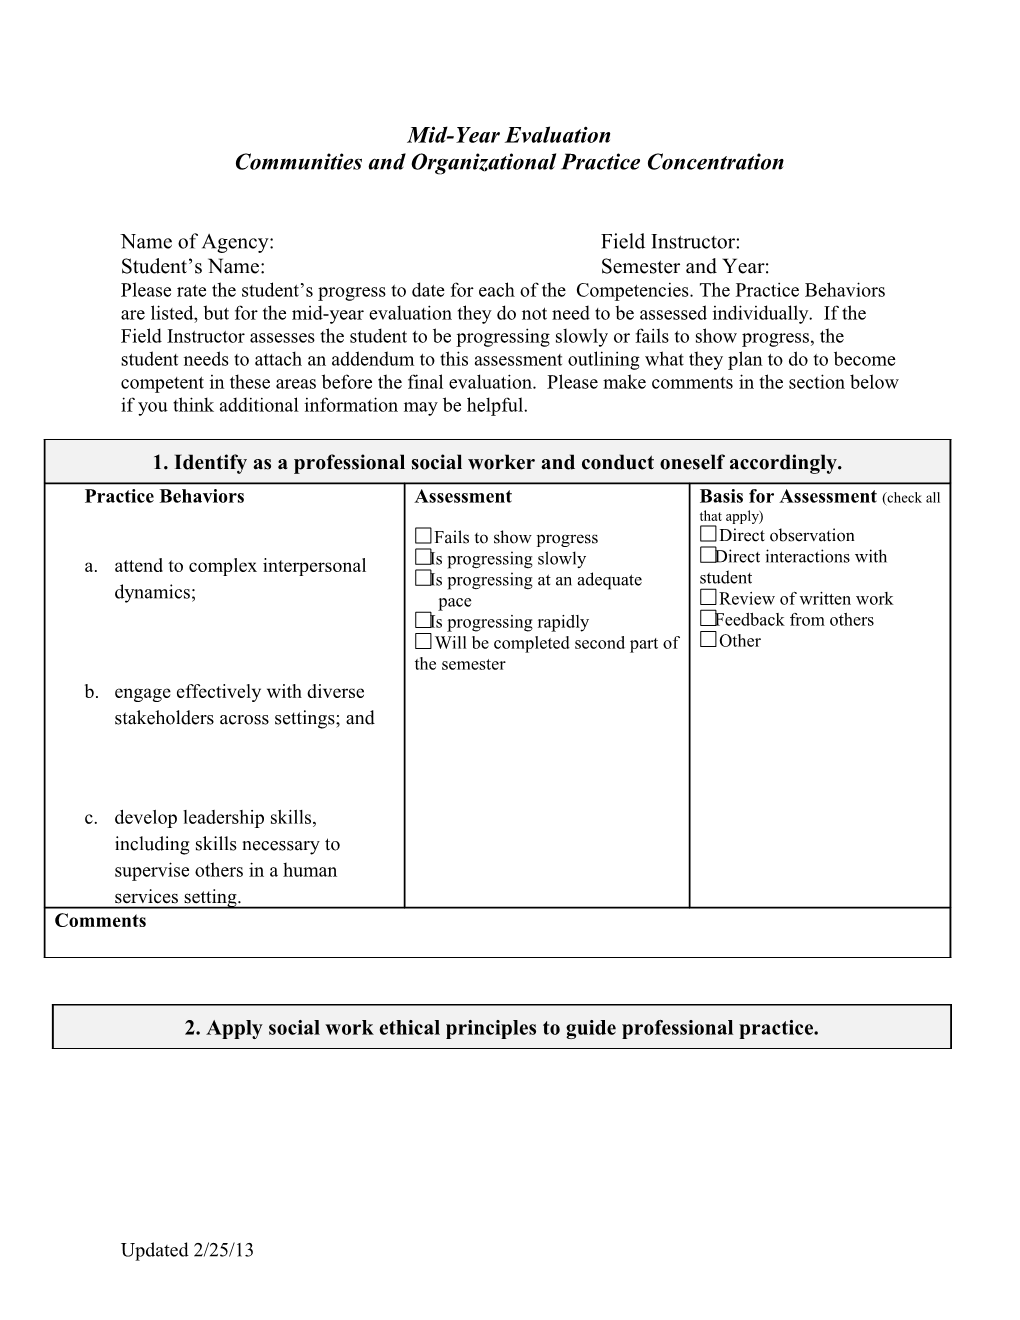 Communities and Organizational Practice Concentration